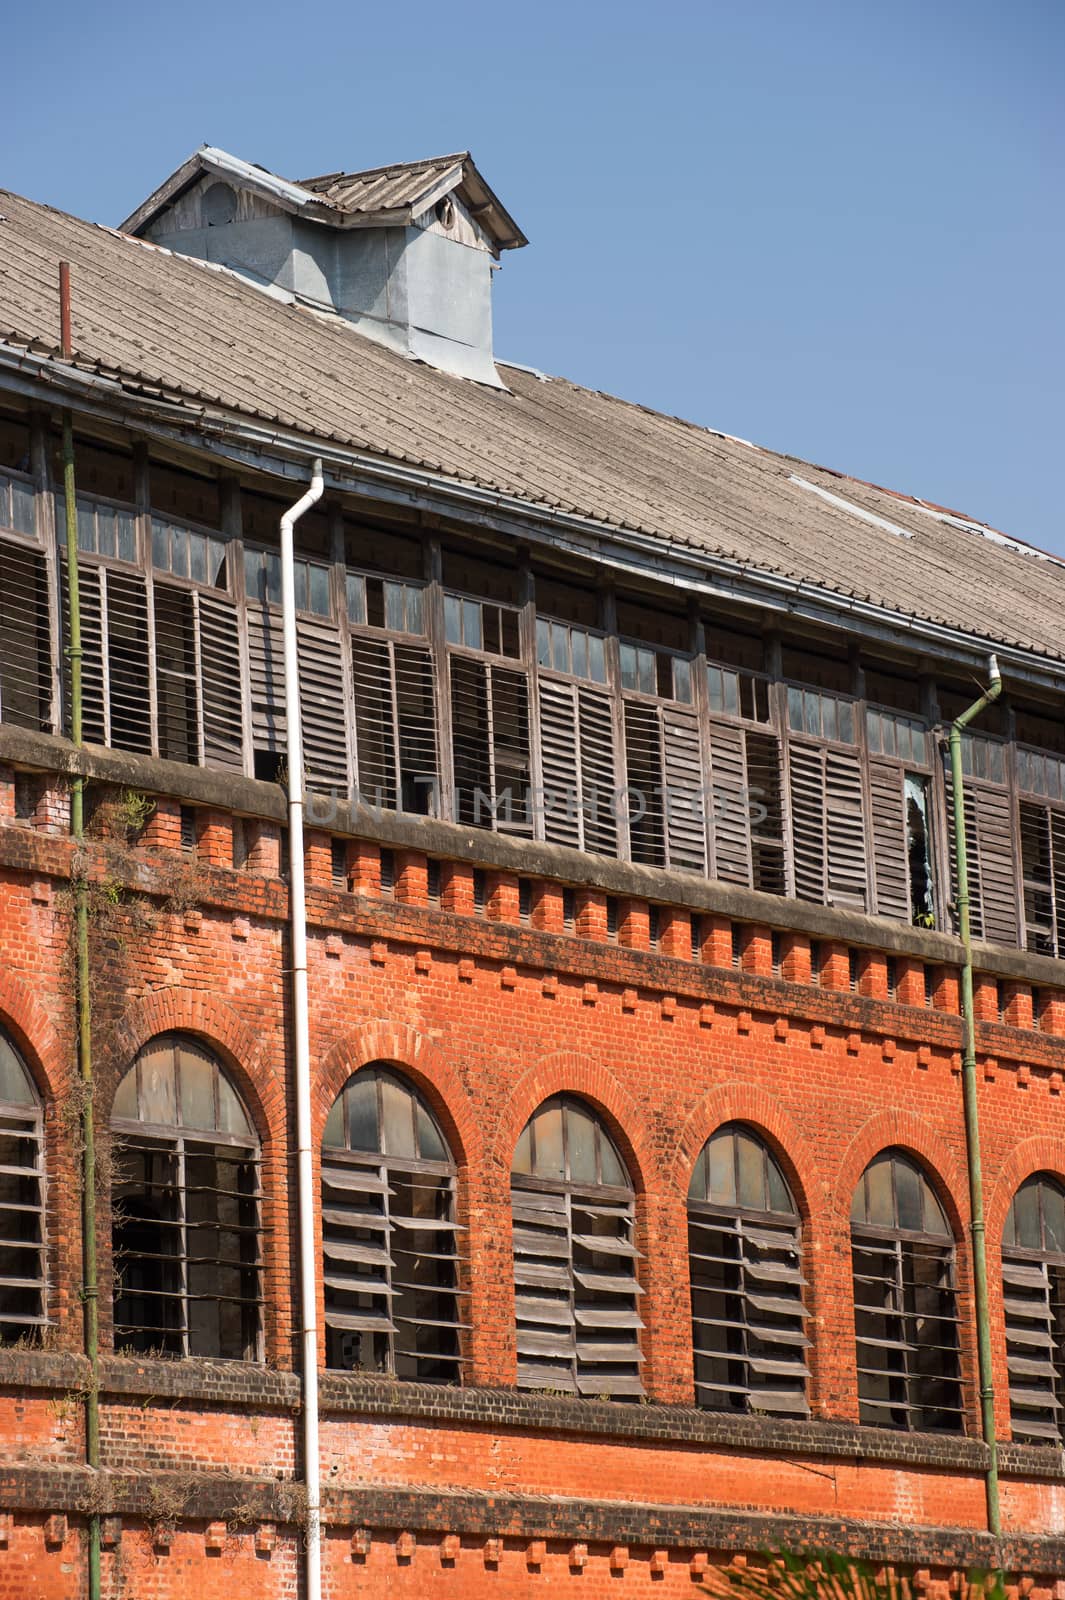 railway building conservation project in Yangon, Myanmar by think4photop